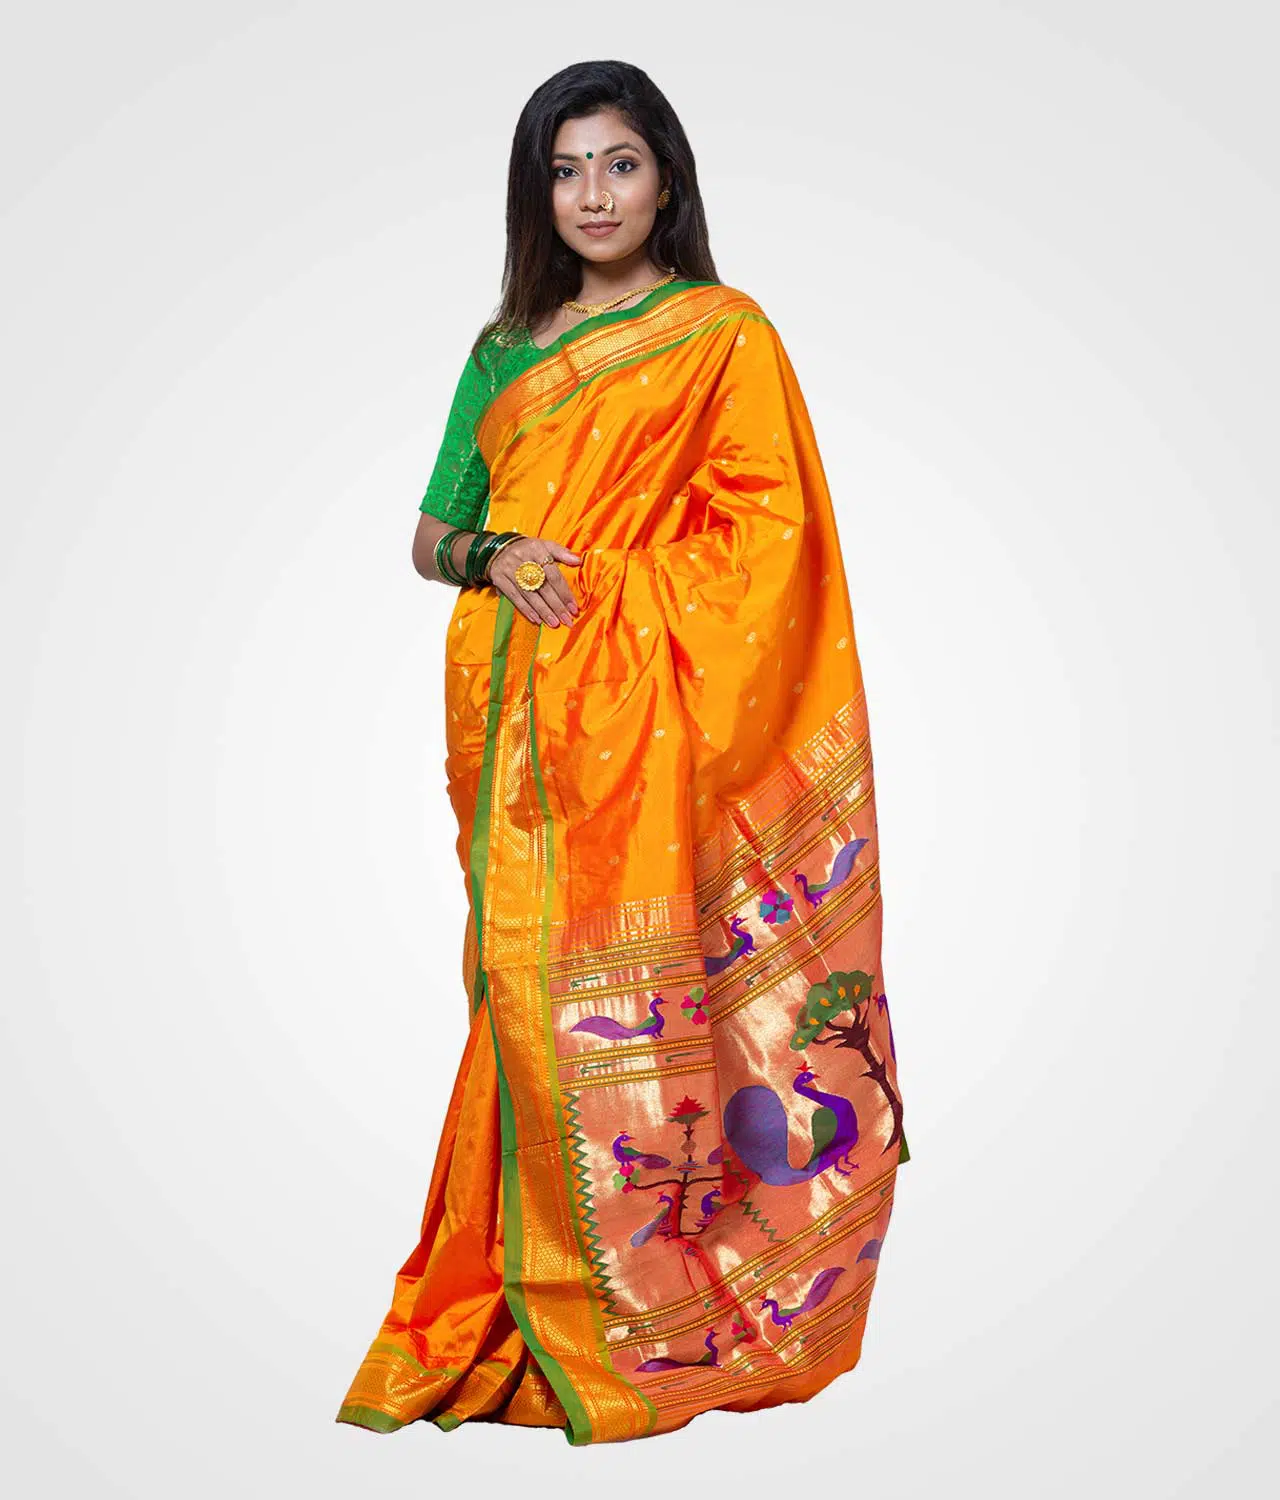 Buy Exclusive Collection Of Paithani Sarees Online At Best Price In India-sgquangbinhtourist.com.vn